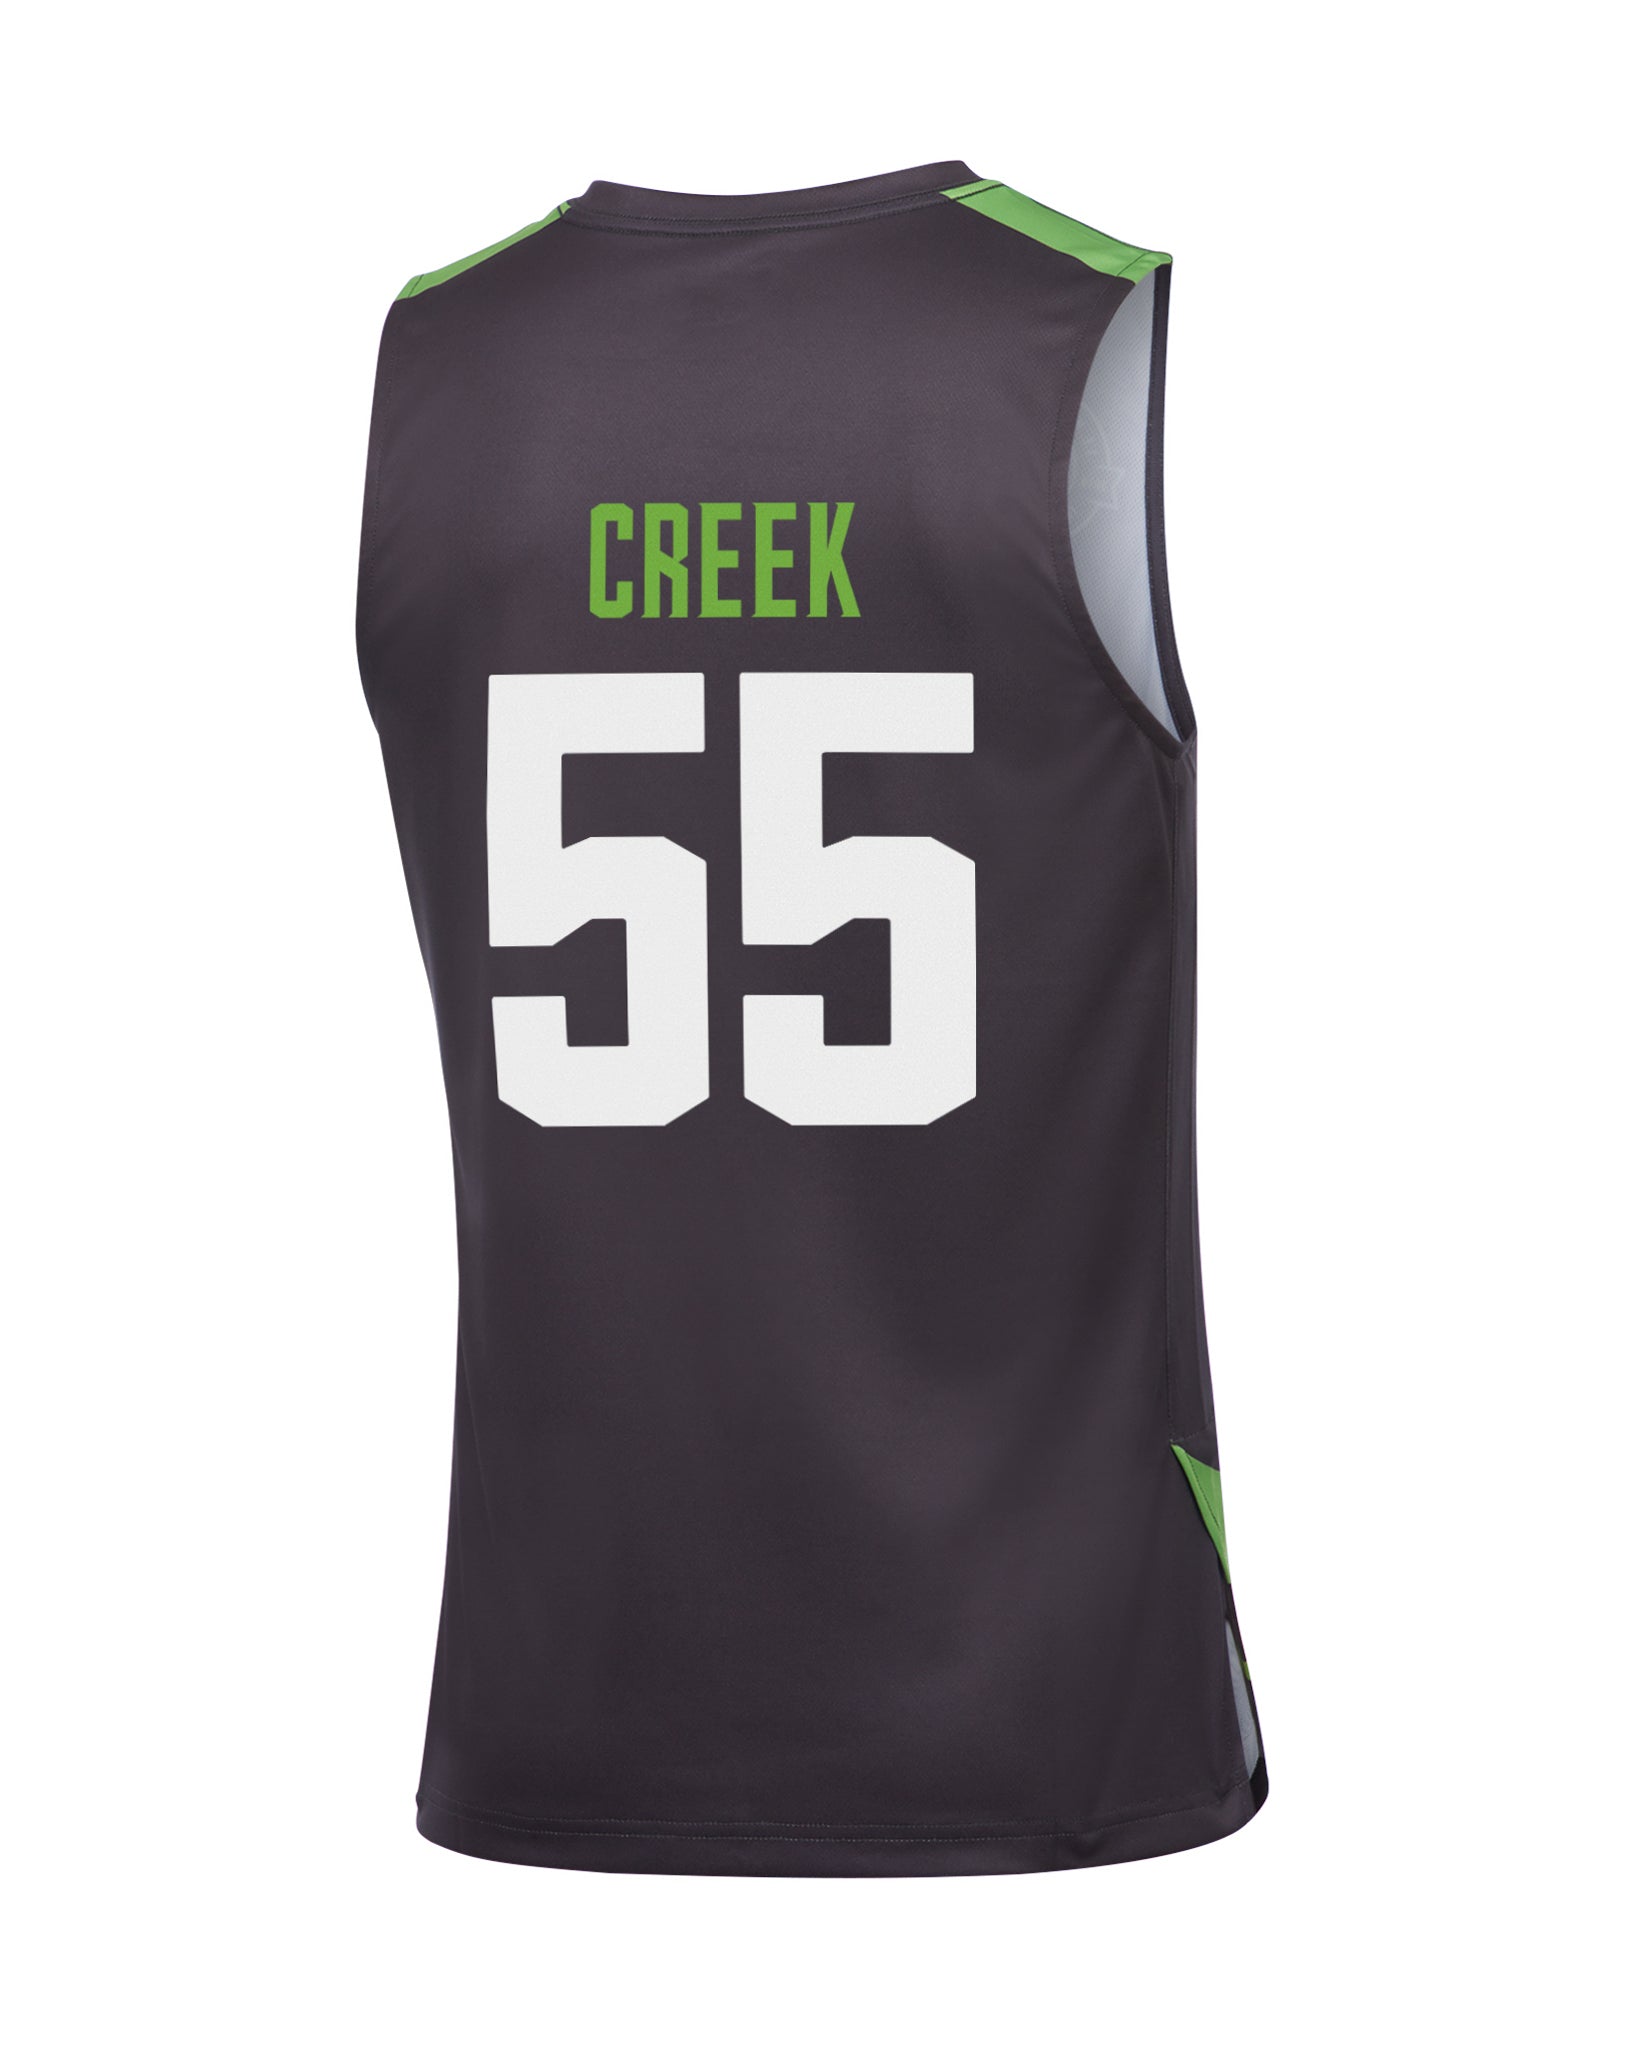 Mitch Creek – Official NBL Store